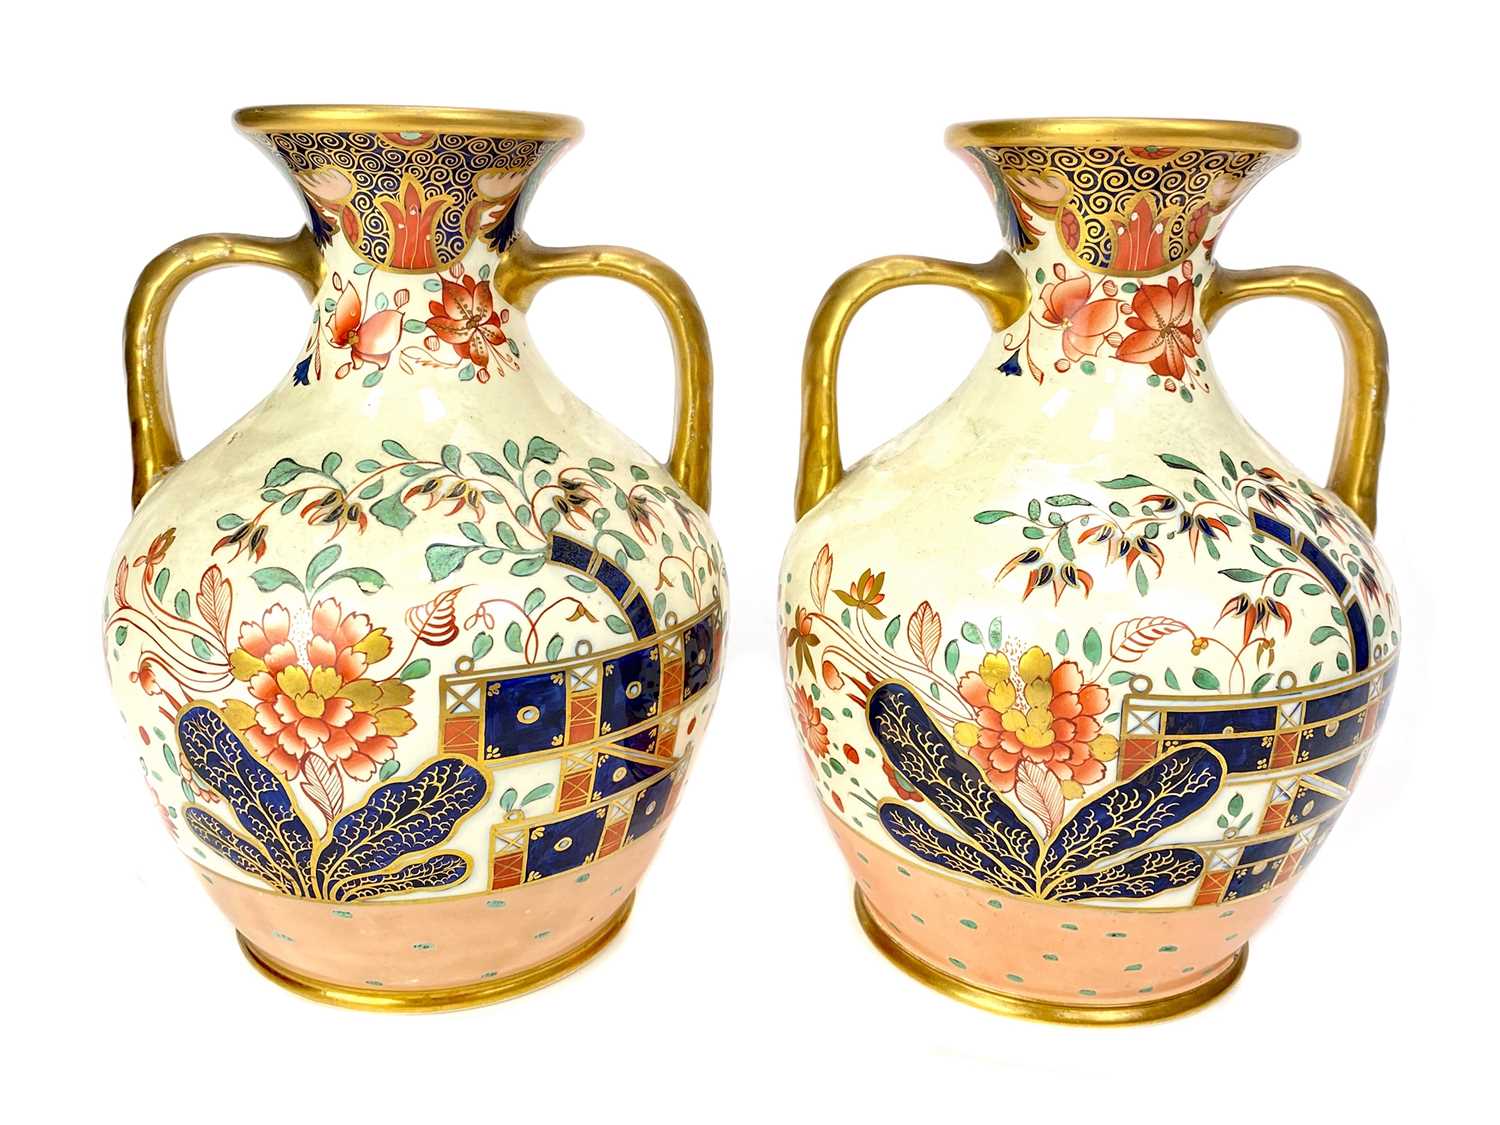 Lot 1025 - A PAIR OF LATE VICTORIAN STAFFORDSHIRE IMARI VASES